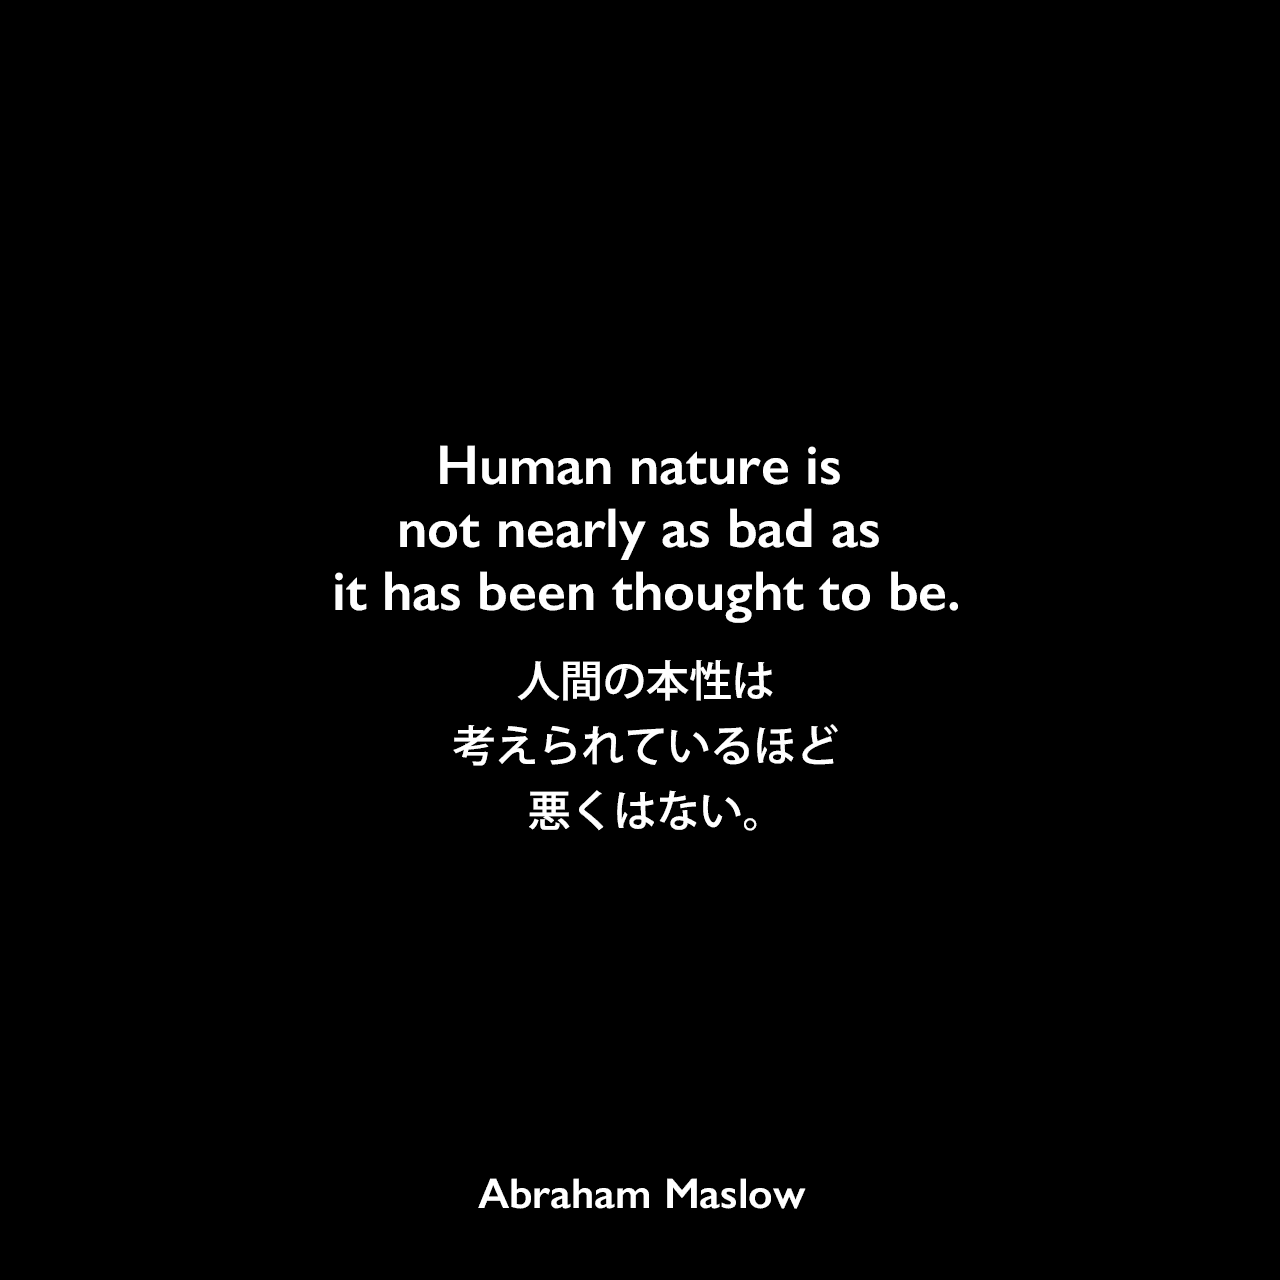 Human nature is not nearly as bad as it has been thought to be.人間の本性は考えられているほど悪くはない。